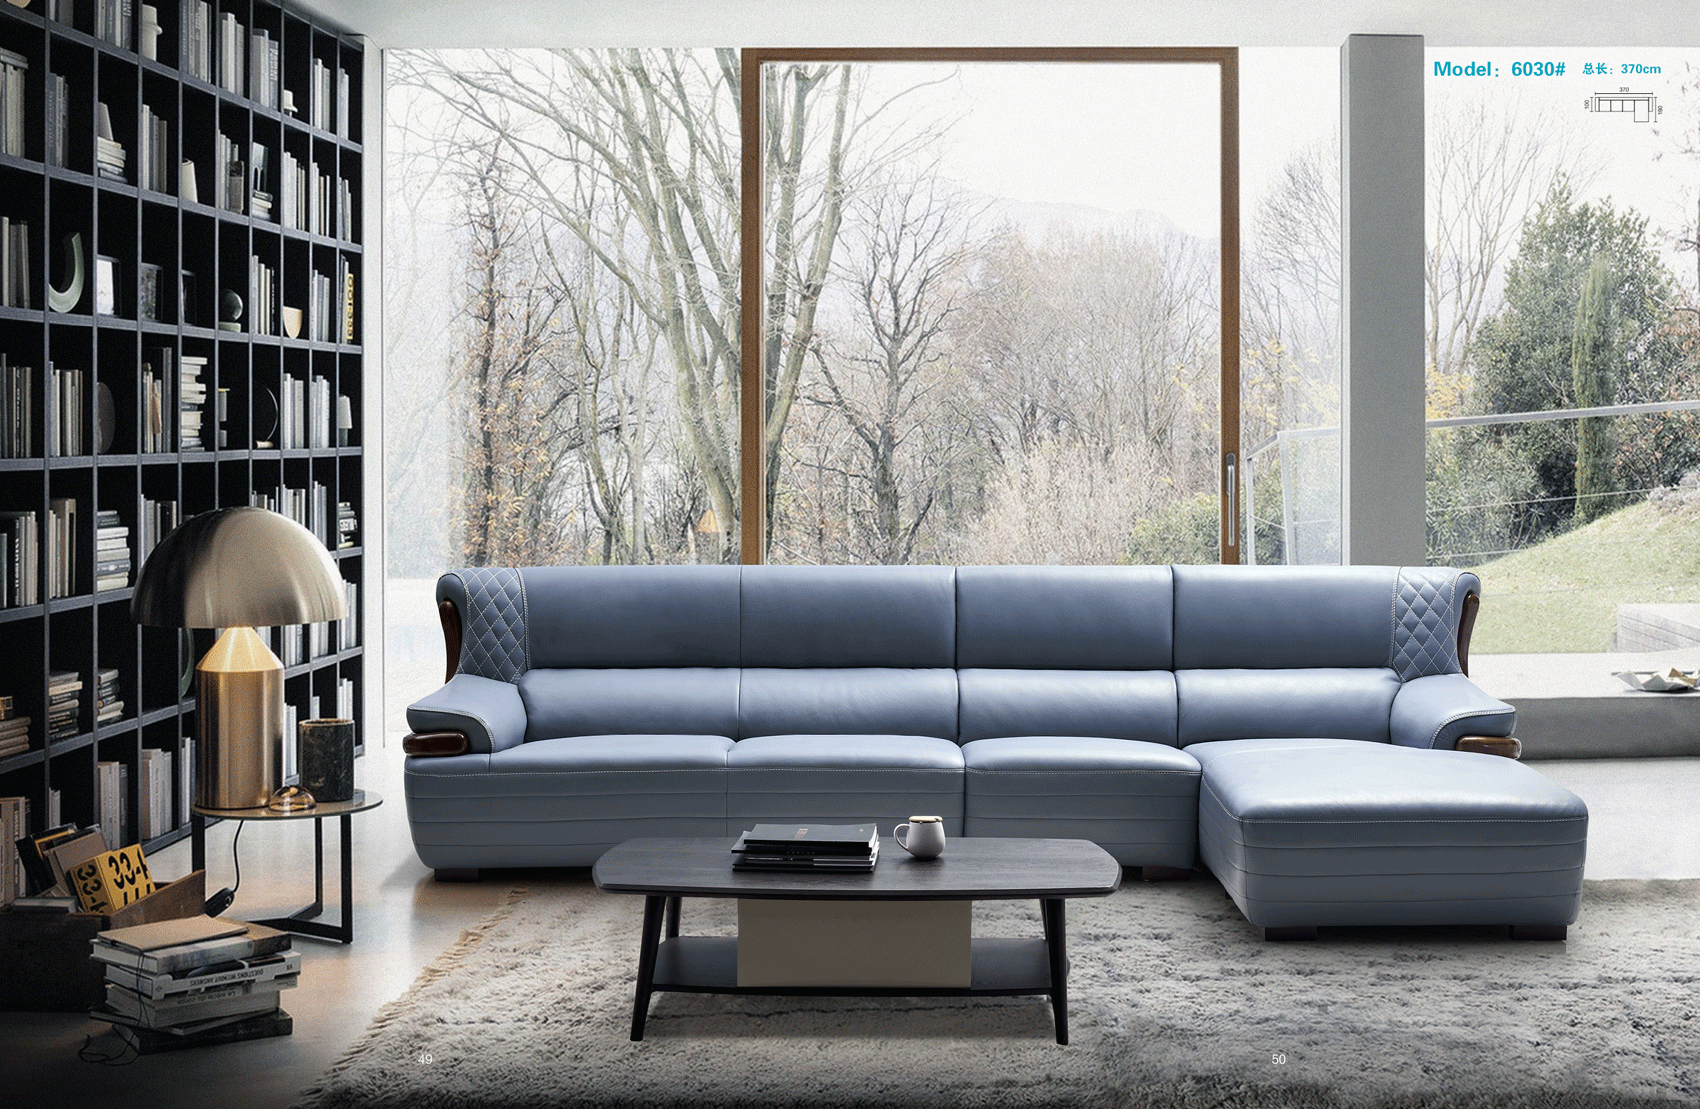 Living Room Furniture Sofas Loveseats and Chairs 6030 Sectional